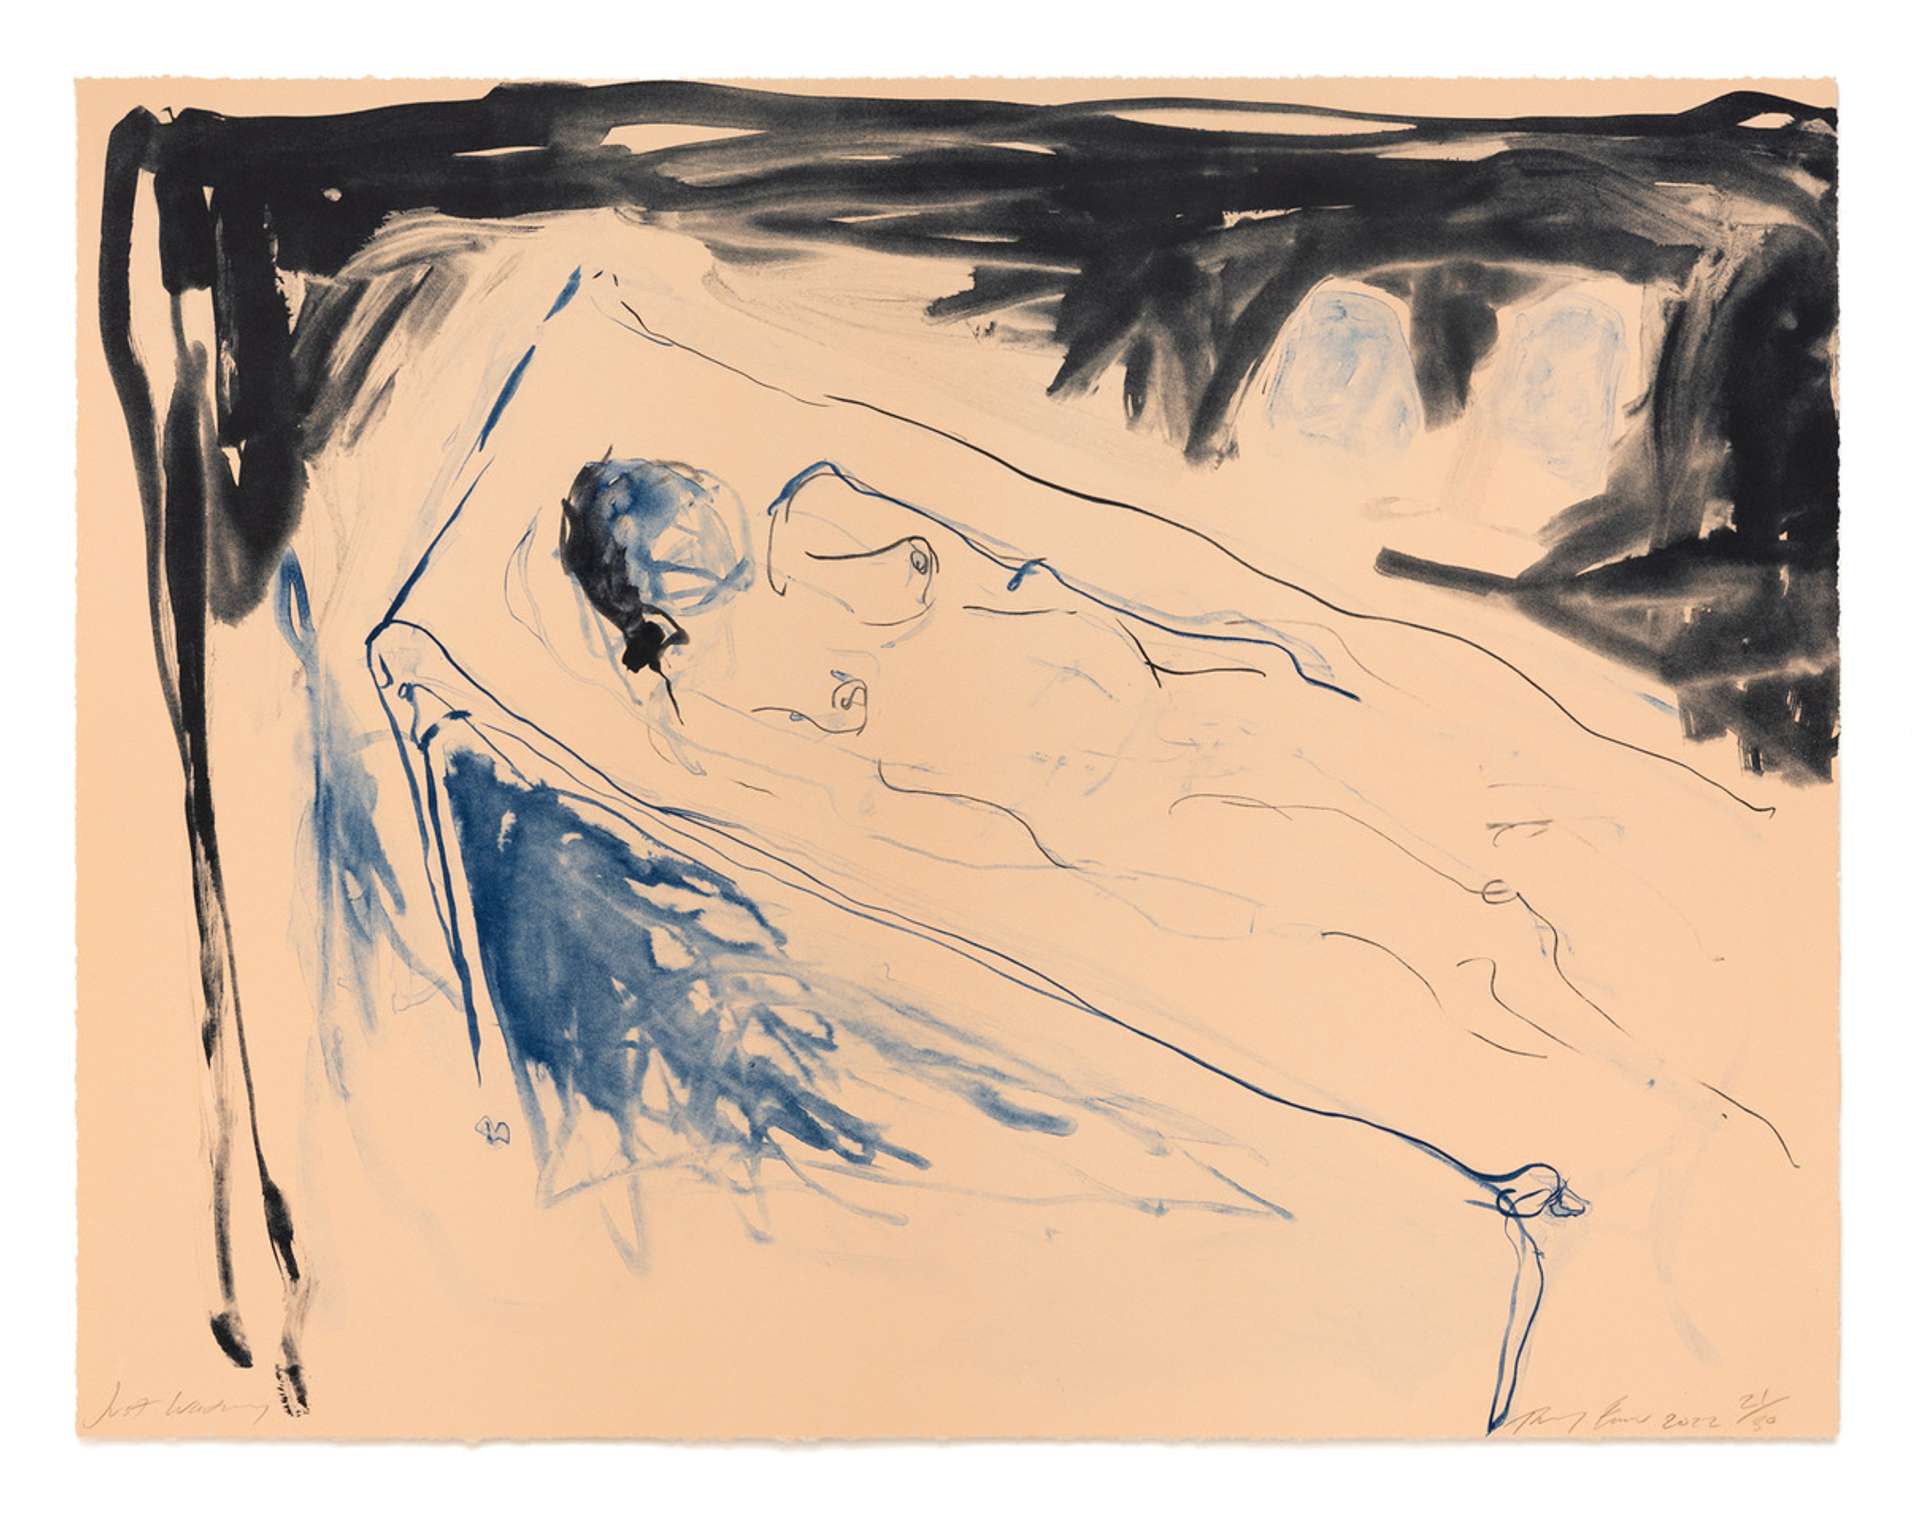 An image of the print Just Waiting by Tracey Emin. It shows a female nude lying in a coffin, her face obscured by a mass of blue paint. The colour palette is in blues and dark greys, against a cream background.